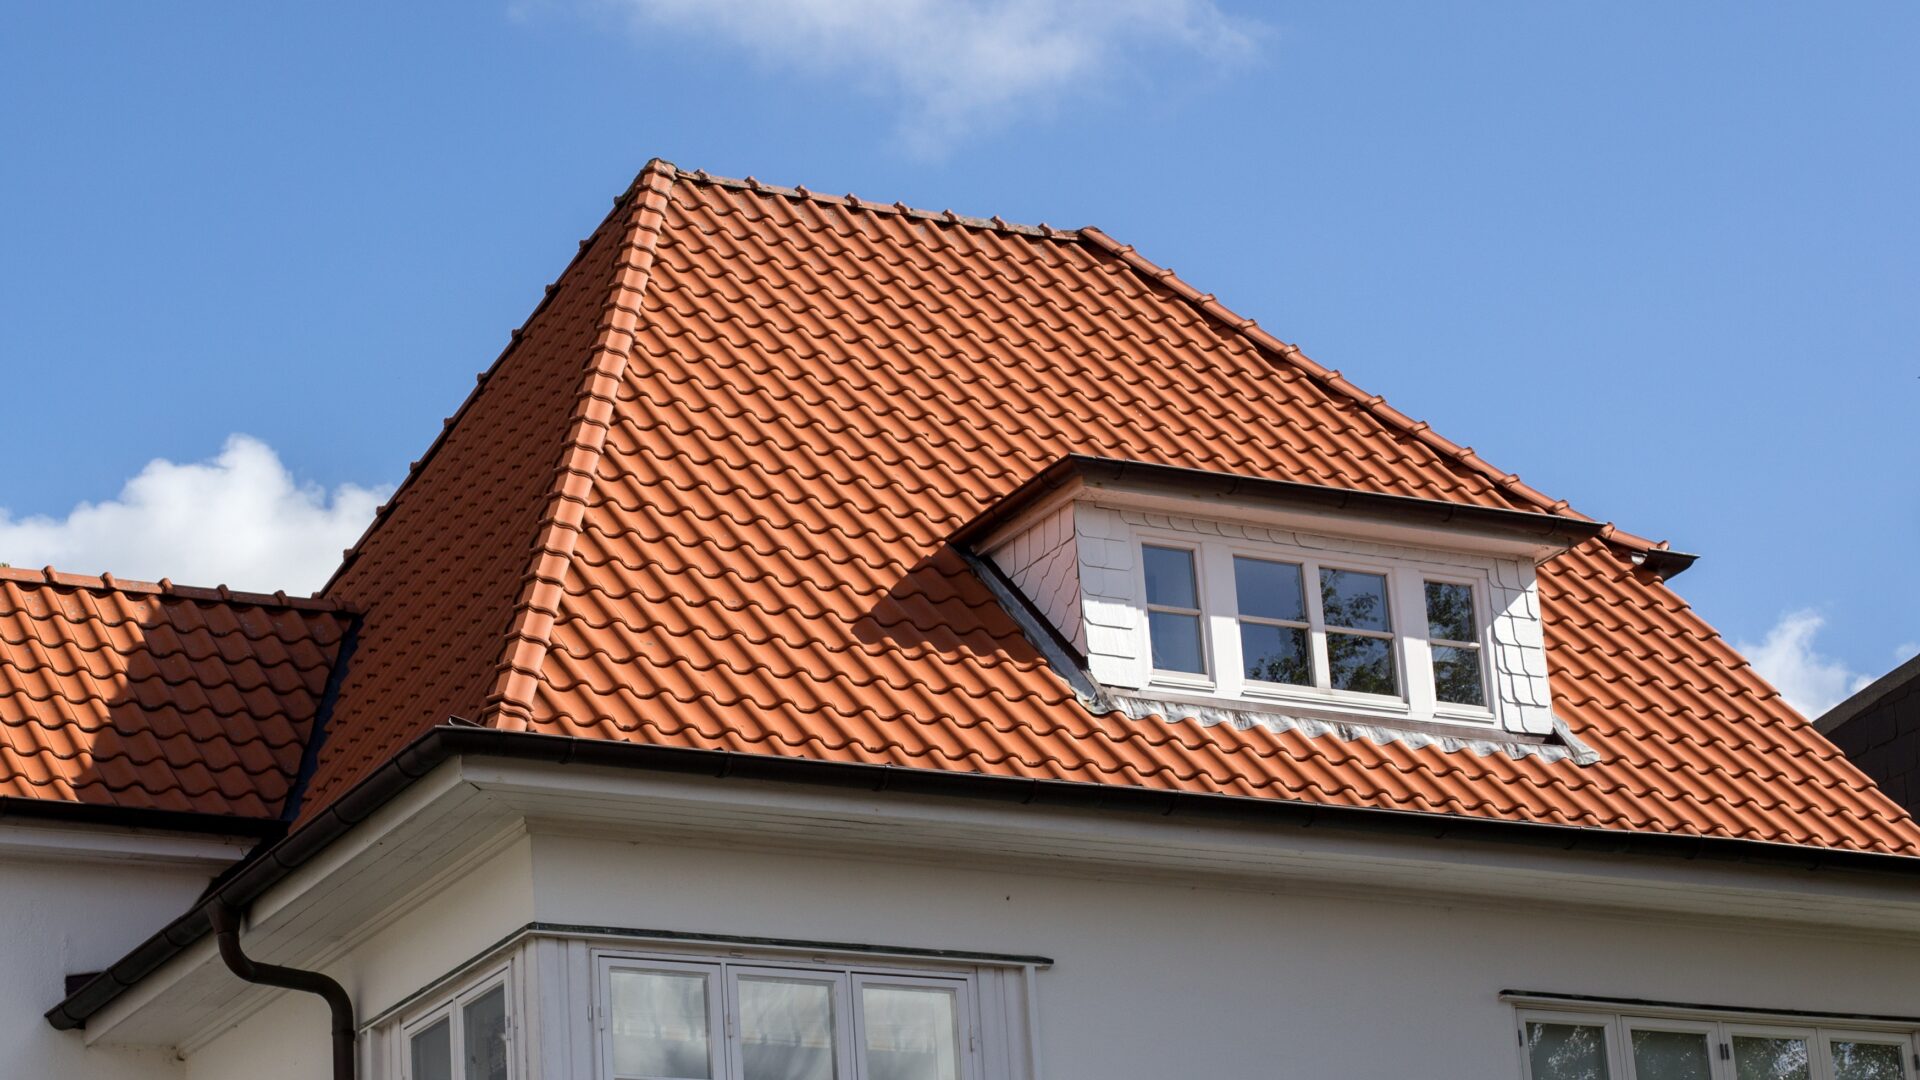 An orange tile roof with a dormer window